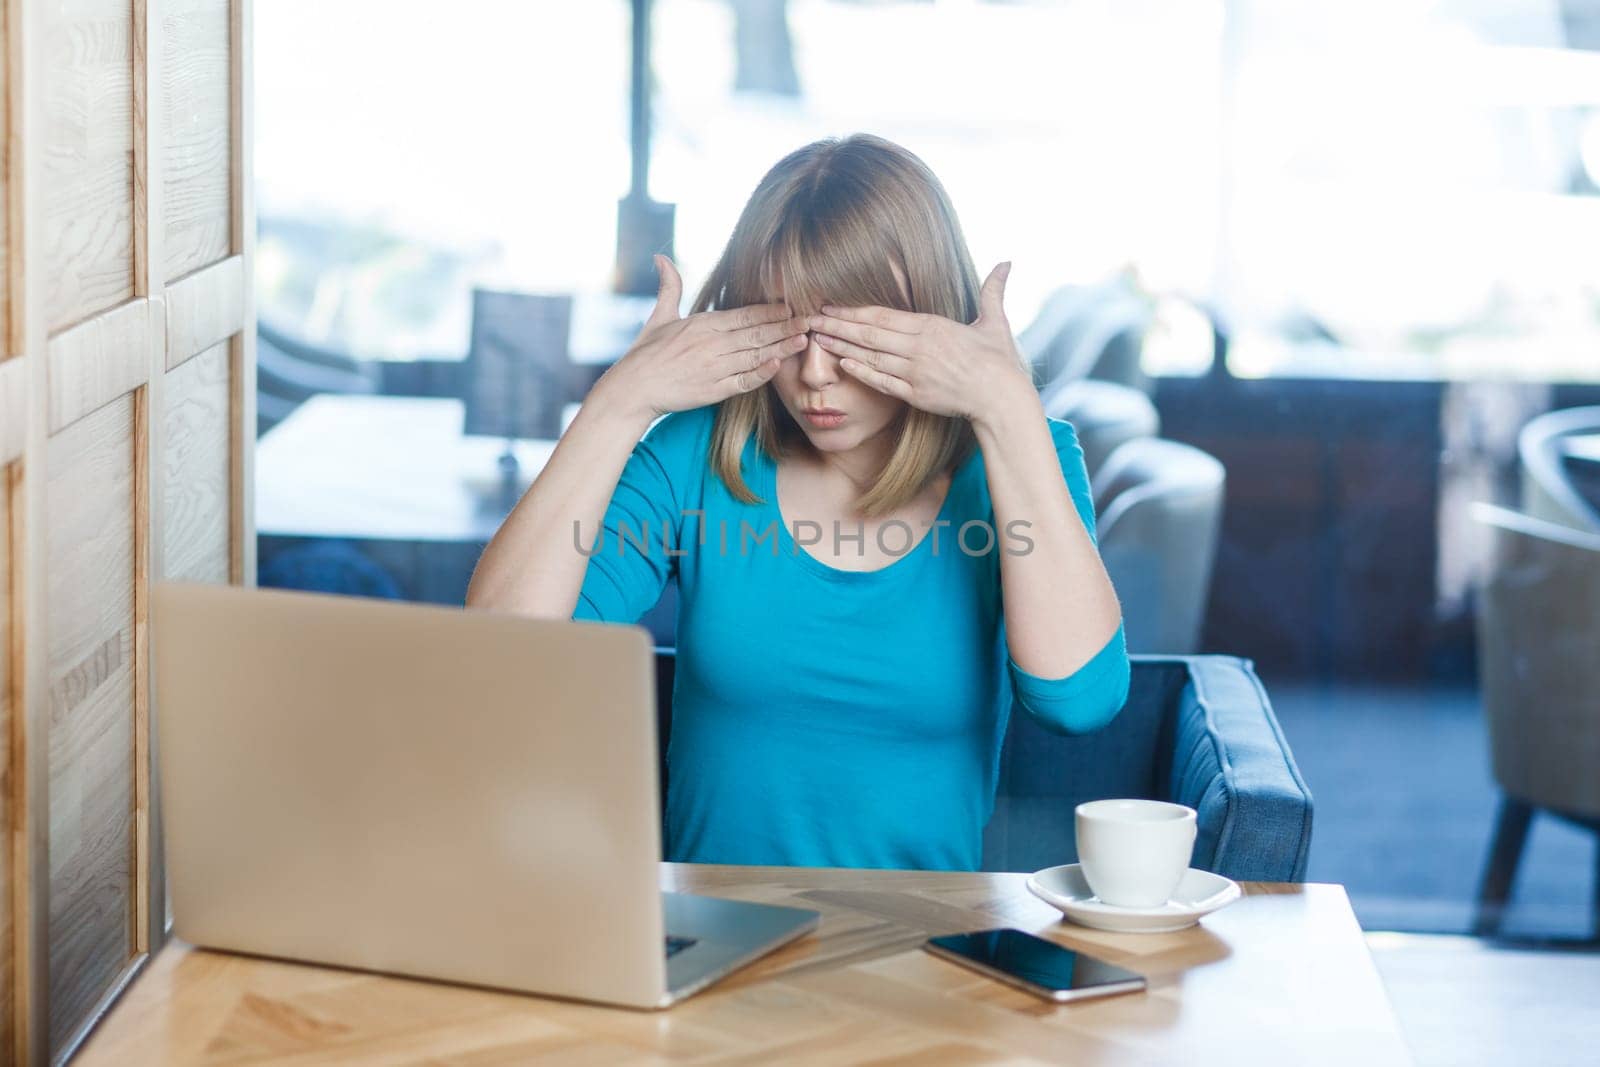 Portrait of attractive young woman with blonde hair in blue shirt working on laptop, covering eyes with palms, doesn't want to see something shameful. Indoor shot in cafe with big window on background